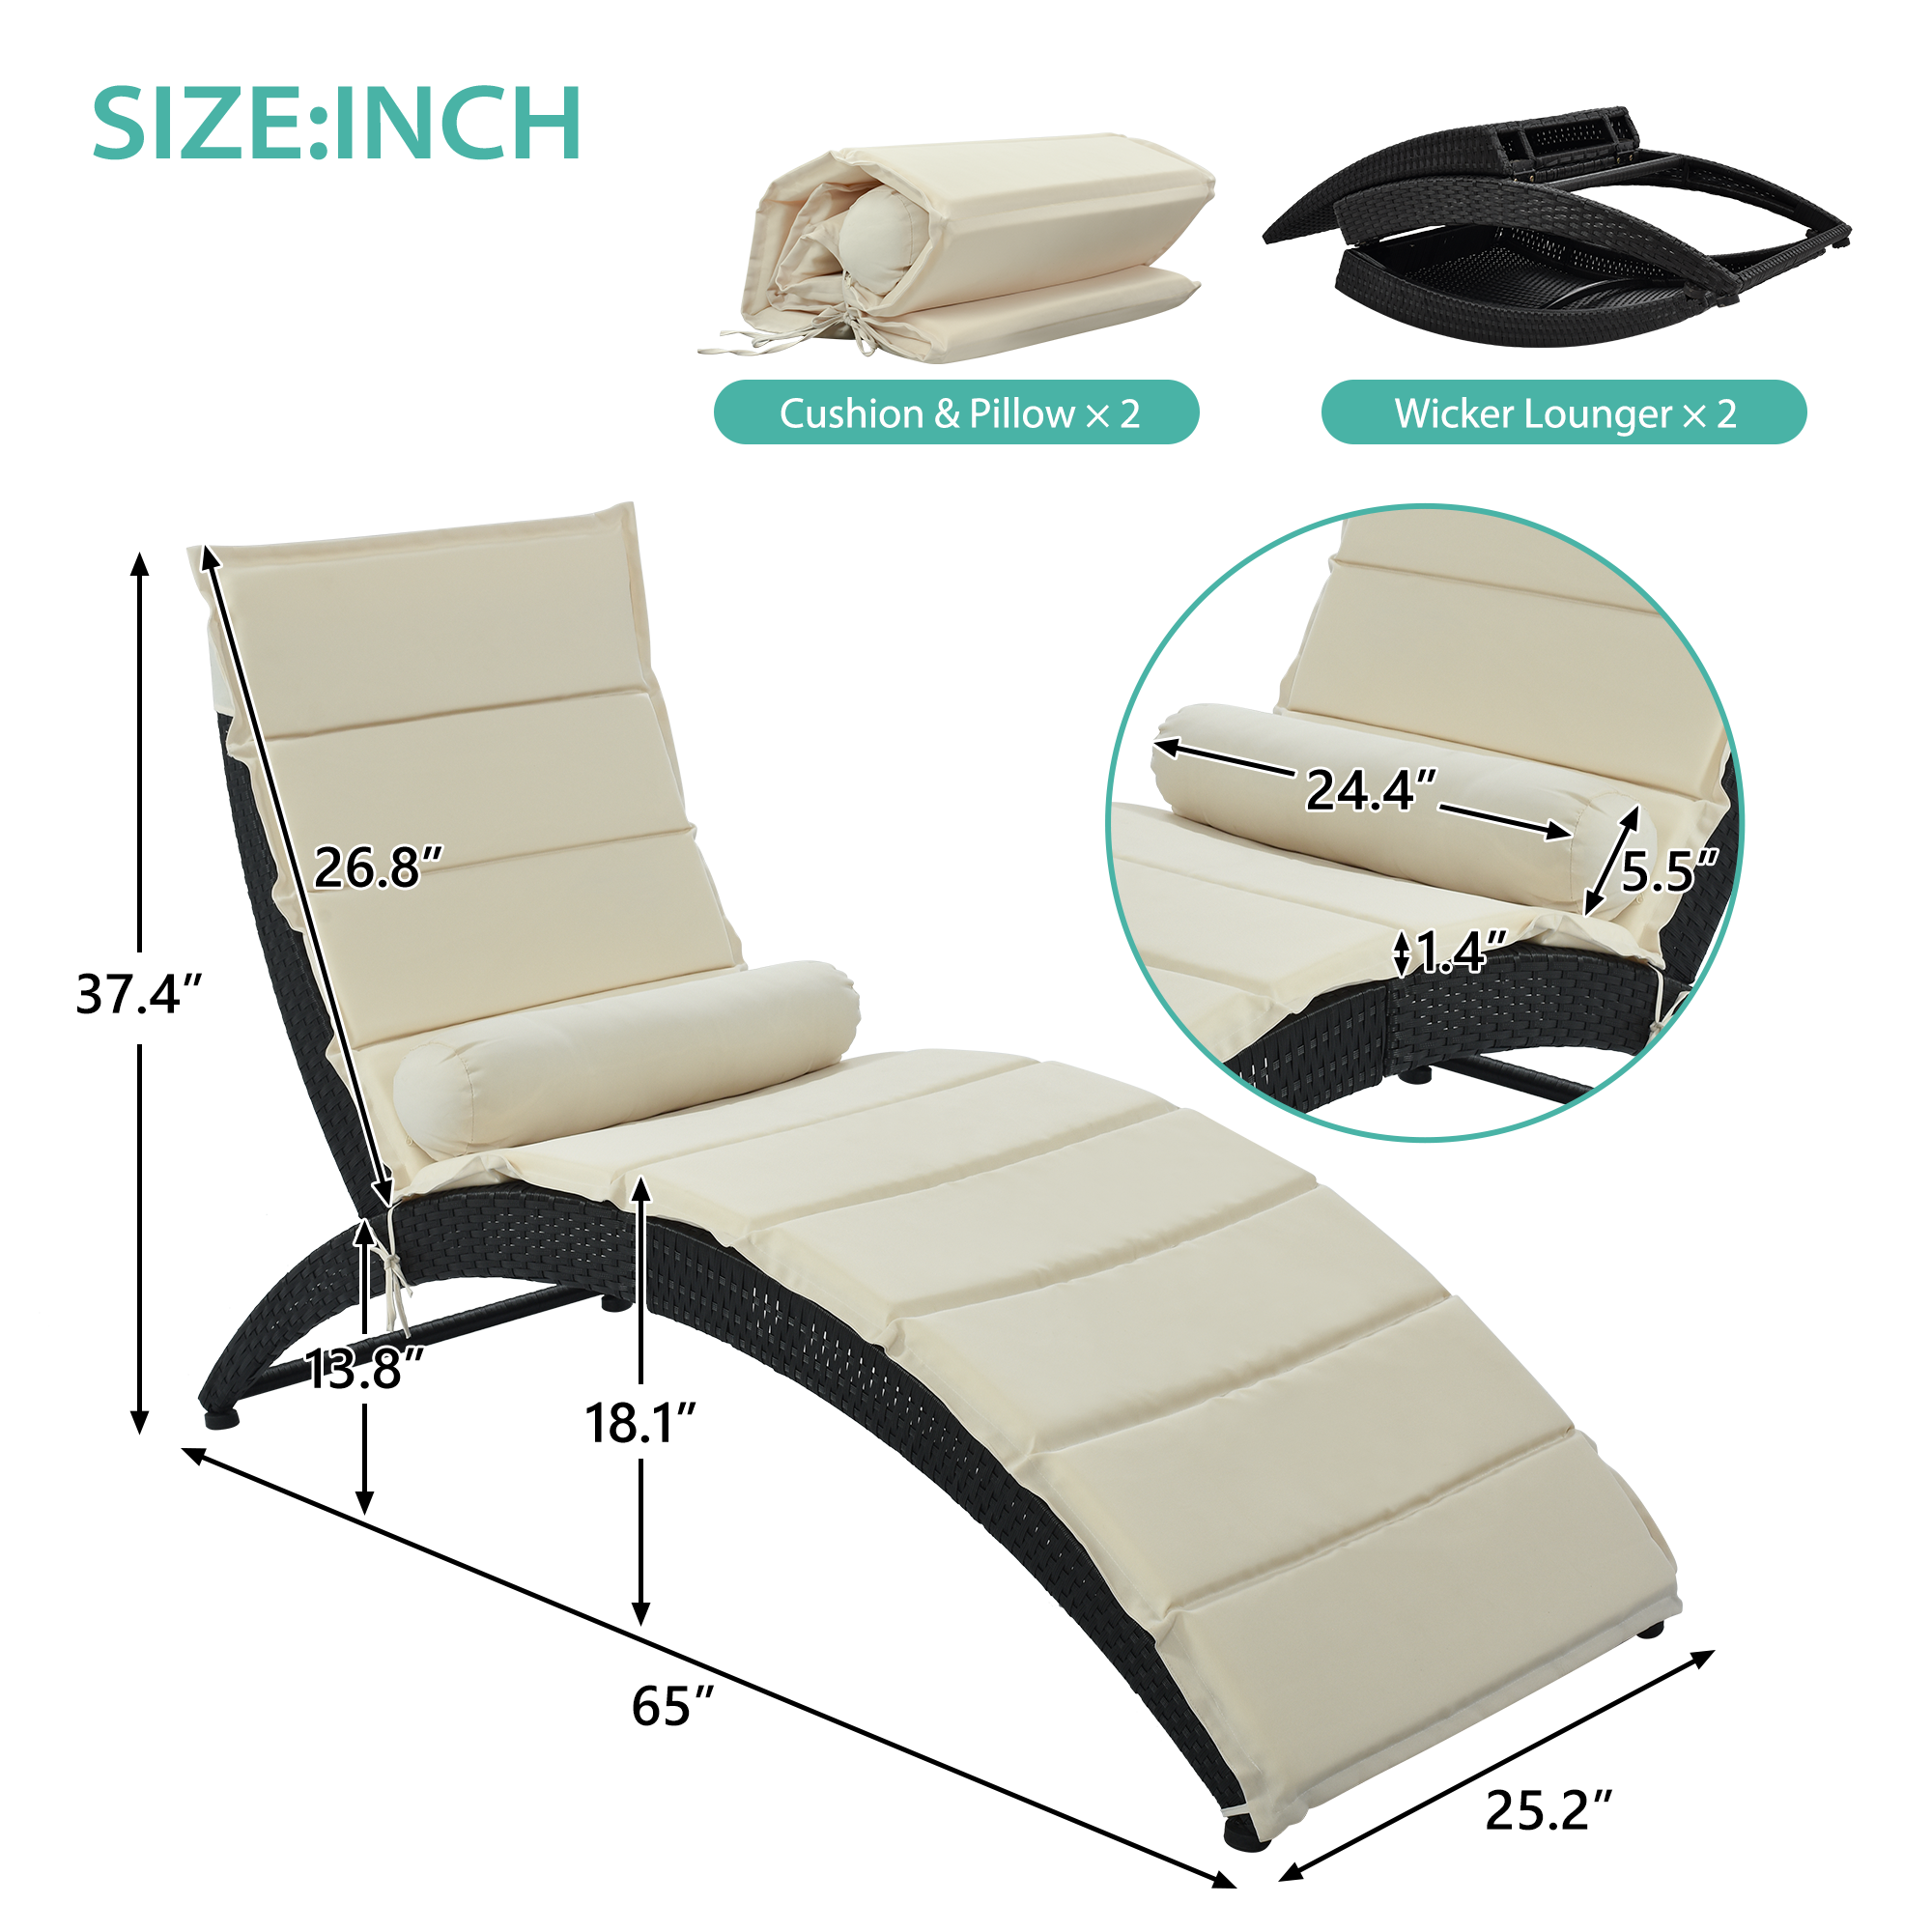 Outdoor Chaise Lounge Set of 2, PE Wicker Lounge Chairs for Outside, Adjustable Chaise Lounges with Removable Cushions, Outdoor Rattan Sunbed for Poolside, Patio, Backyard, Garden, Beige, D6380 - image 5 of 10